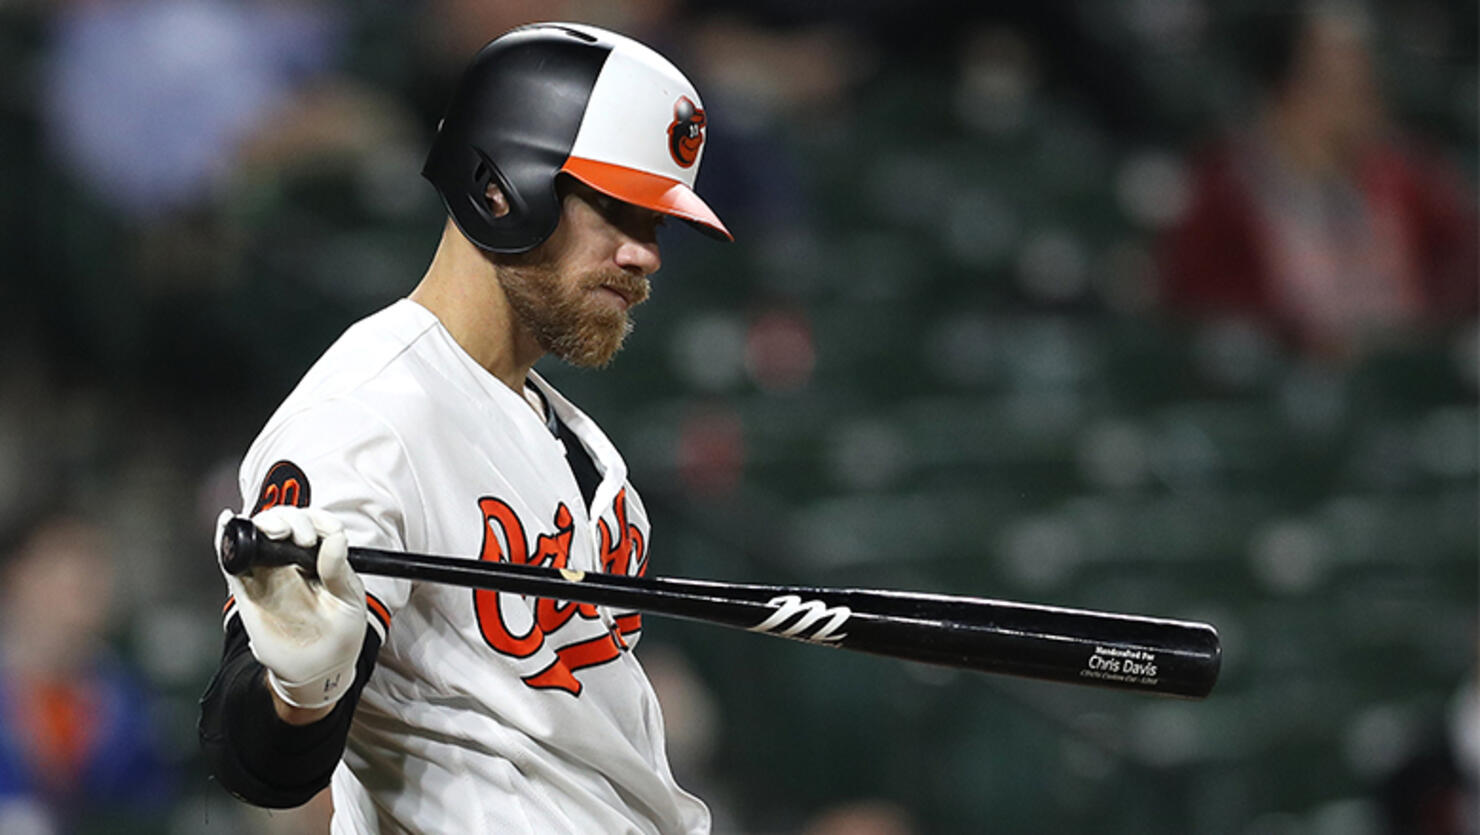 Chris Davis #19 of the Baltimore Orioles bats against the Oakland Athletics during the seventh inning at Oriole Park at Camden Yards on April 8, 2019 in Baltimore, Maryland.